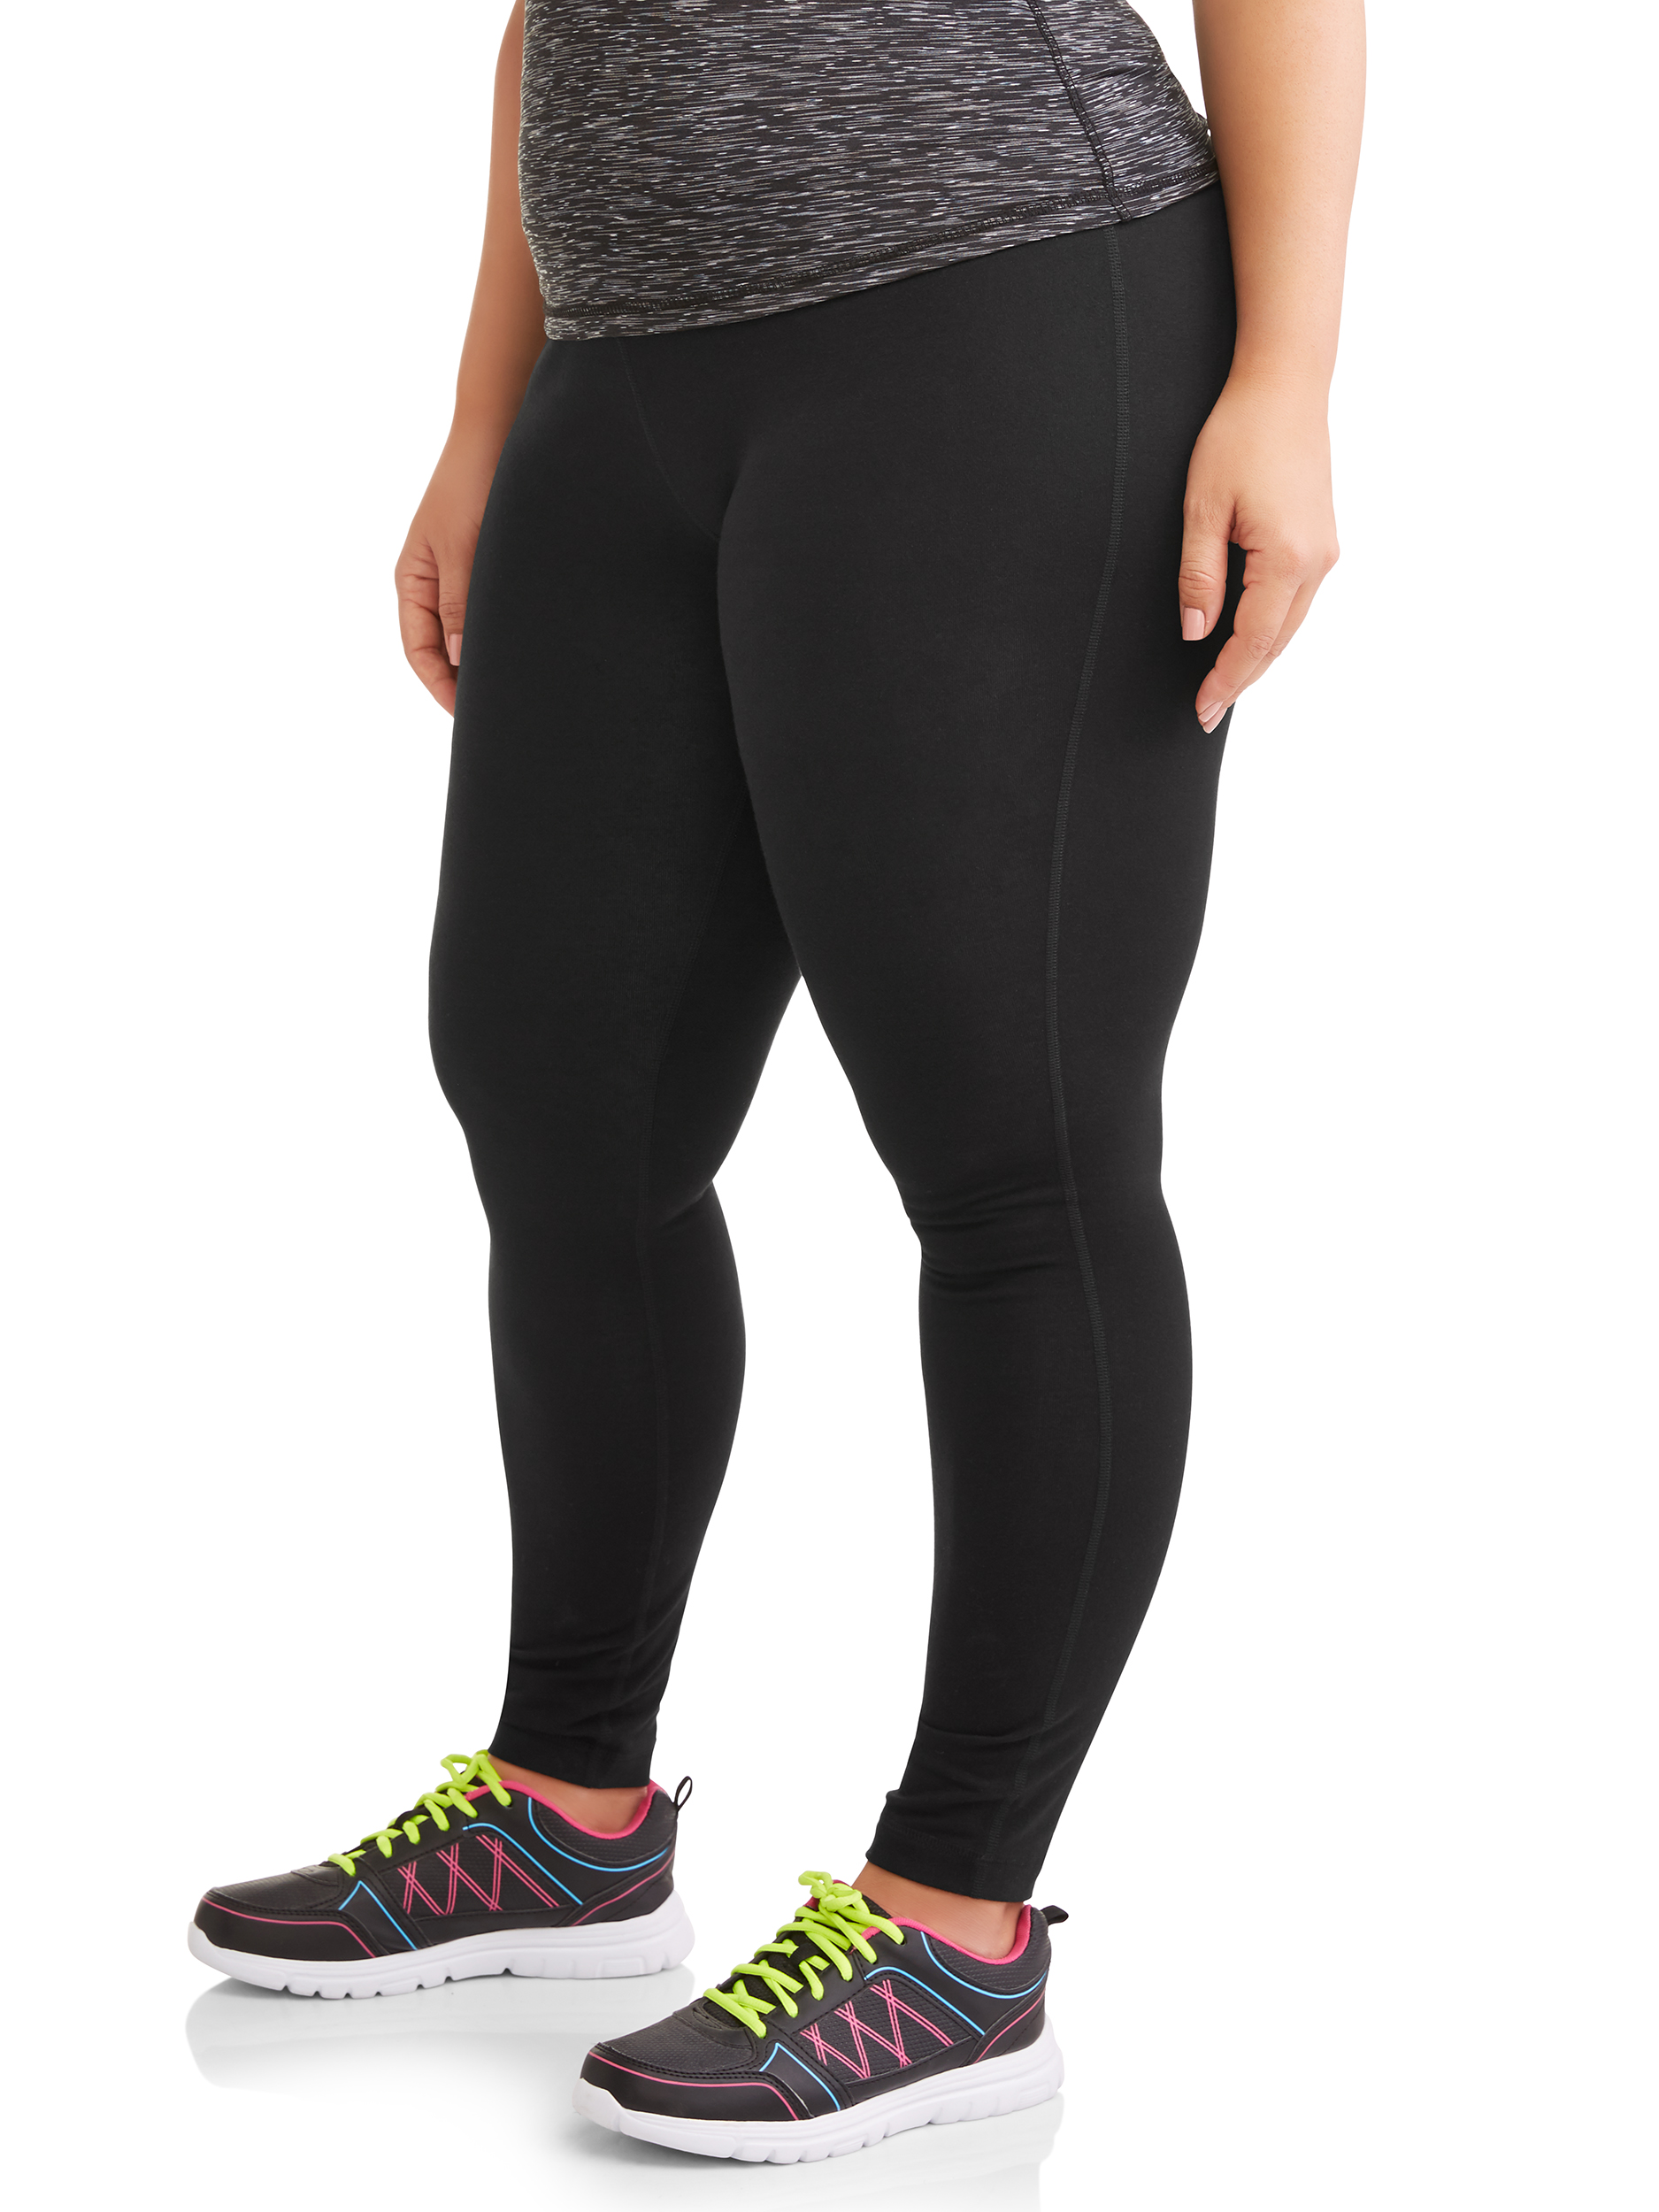 Athletic Works Women's and Women's Plus Stretch Cotton Blend Ankle Leggings with Side Pockets - image 3 of 4